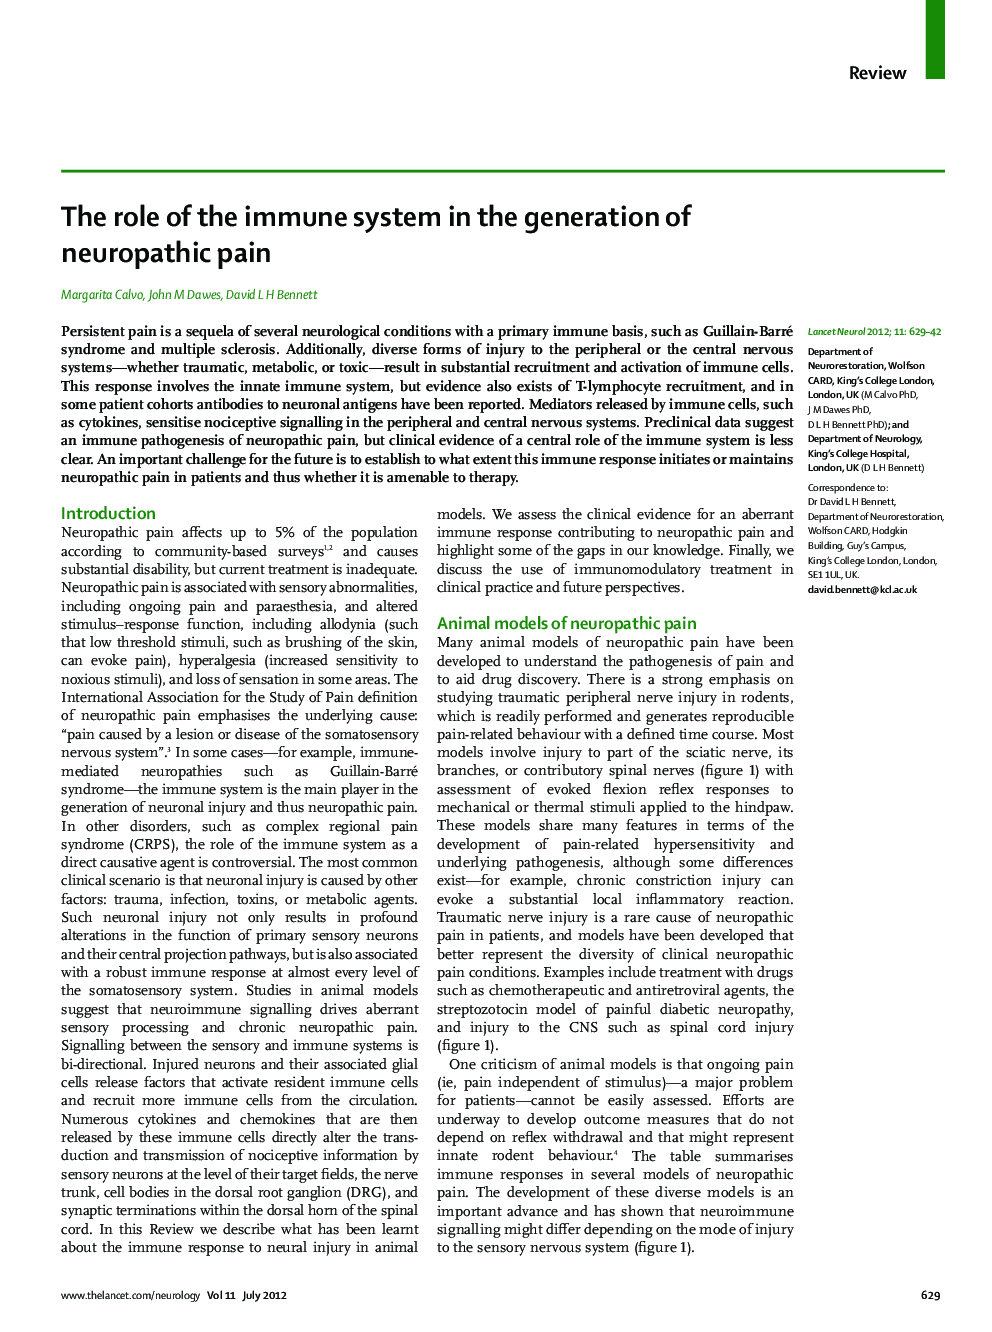 The role of the immune system in the generation of neuropathic pain